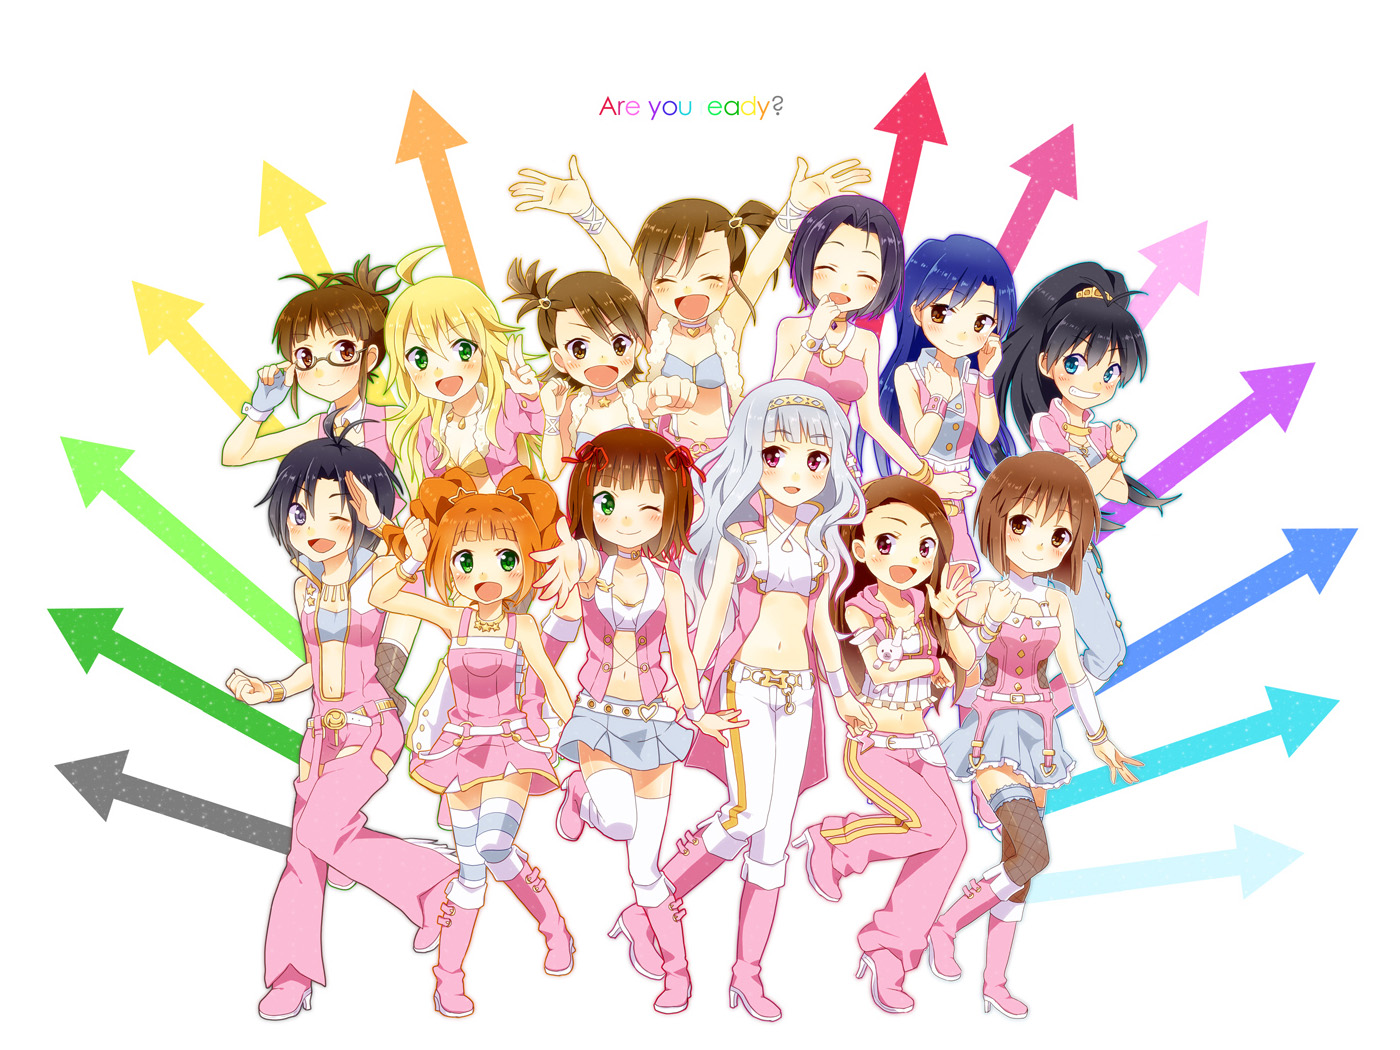 Anime The iDOLM@STER Wallpaper